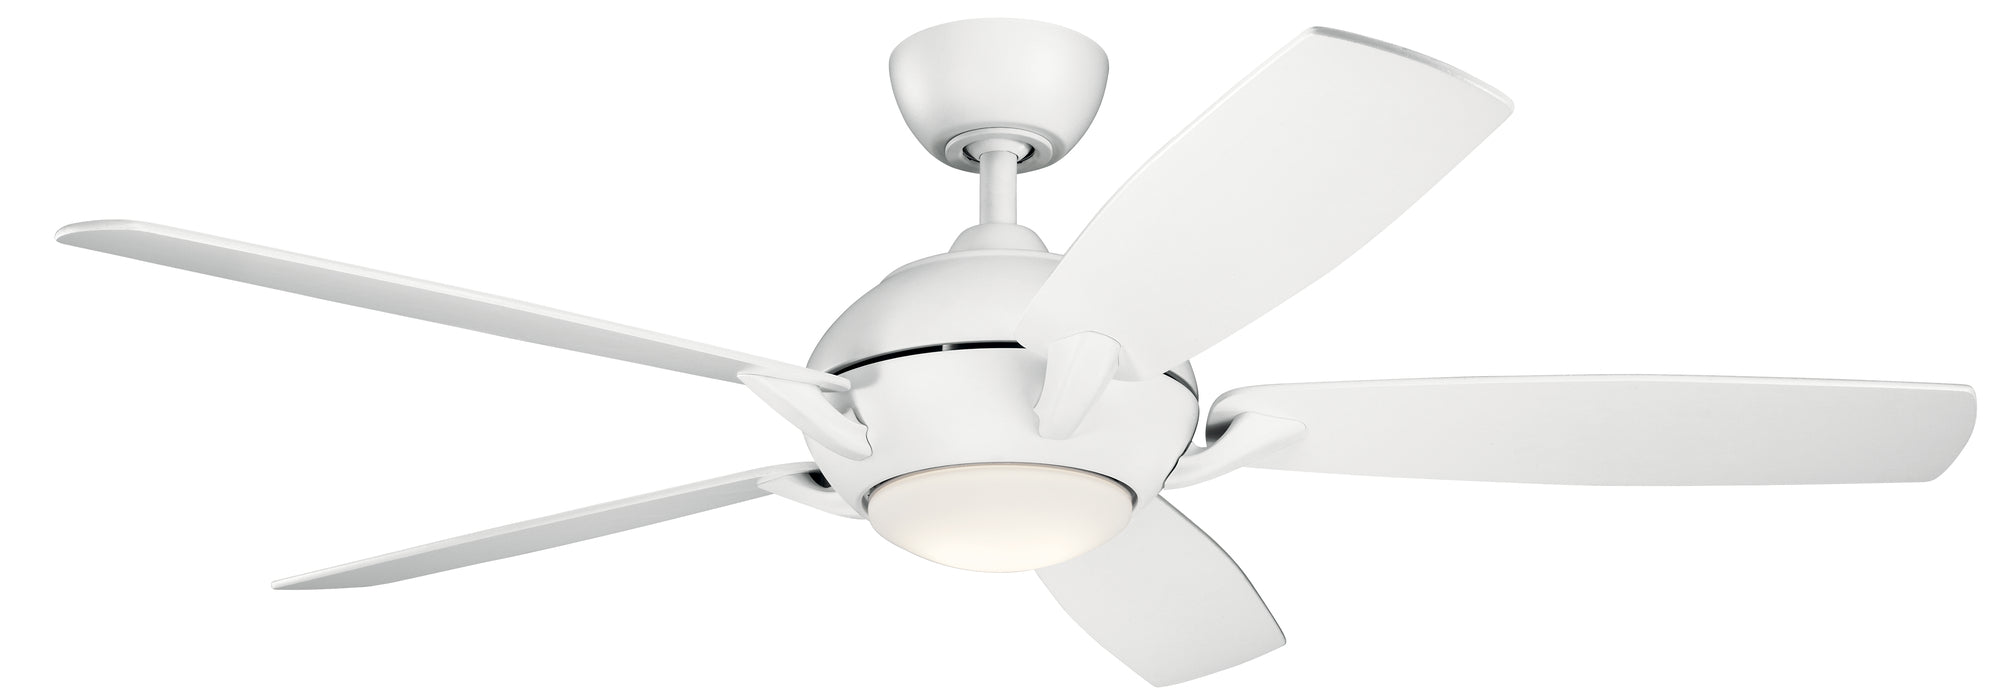 GENO Ceiling fan White INTEGRATED LED - 330001MWH | KICHLER